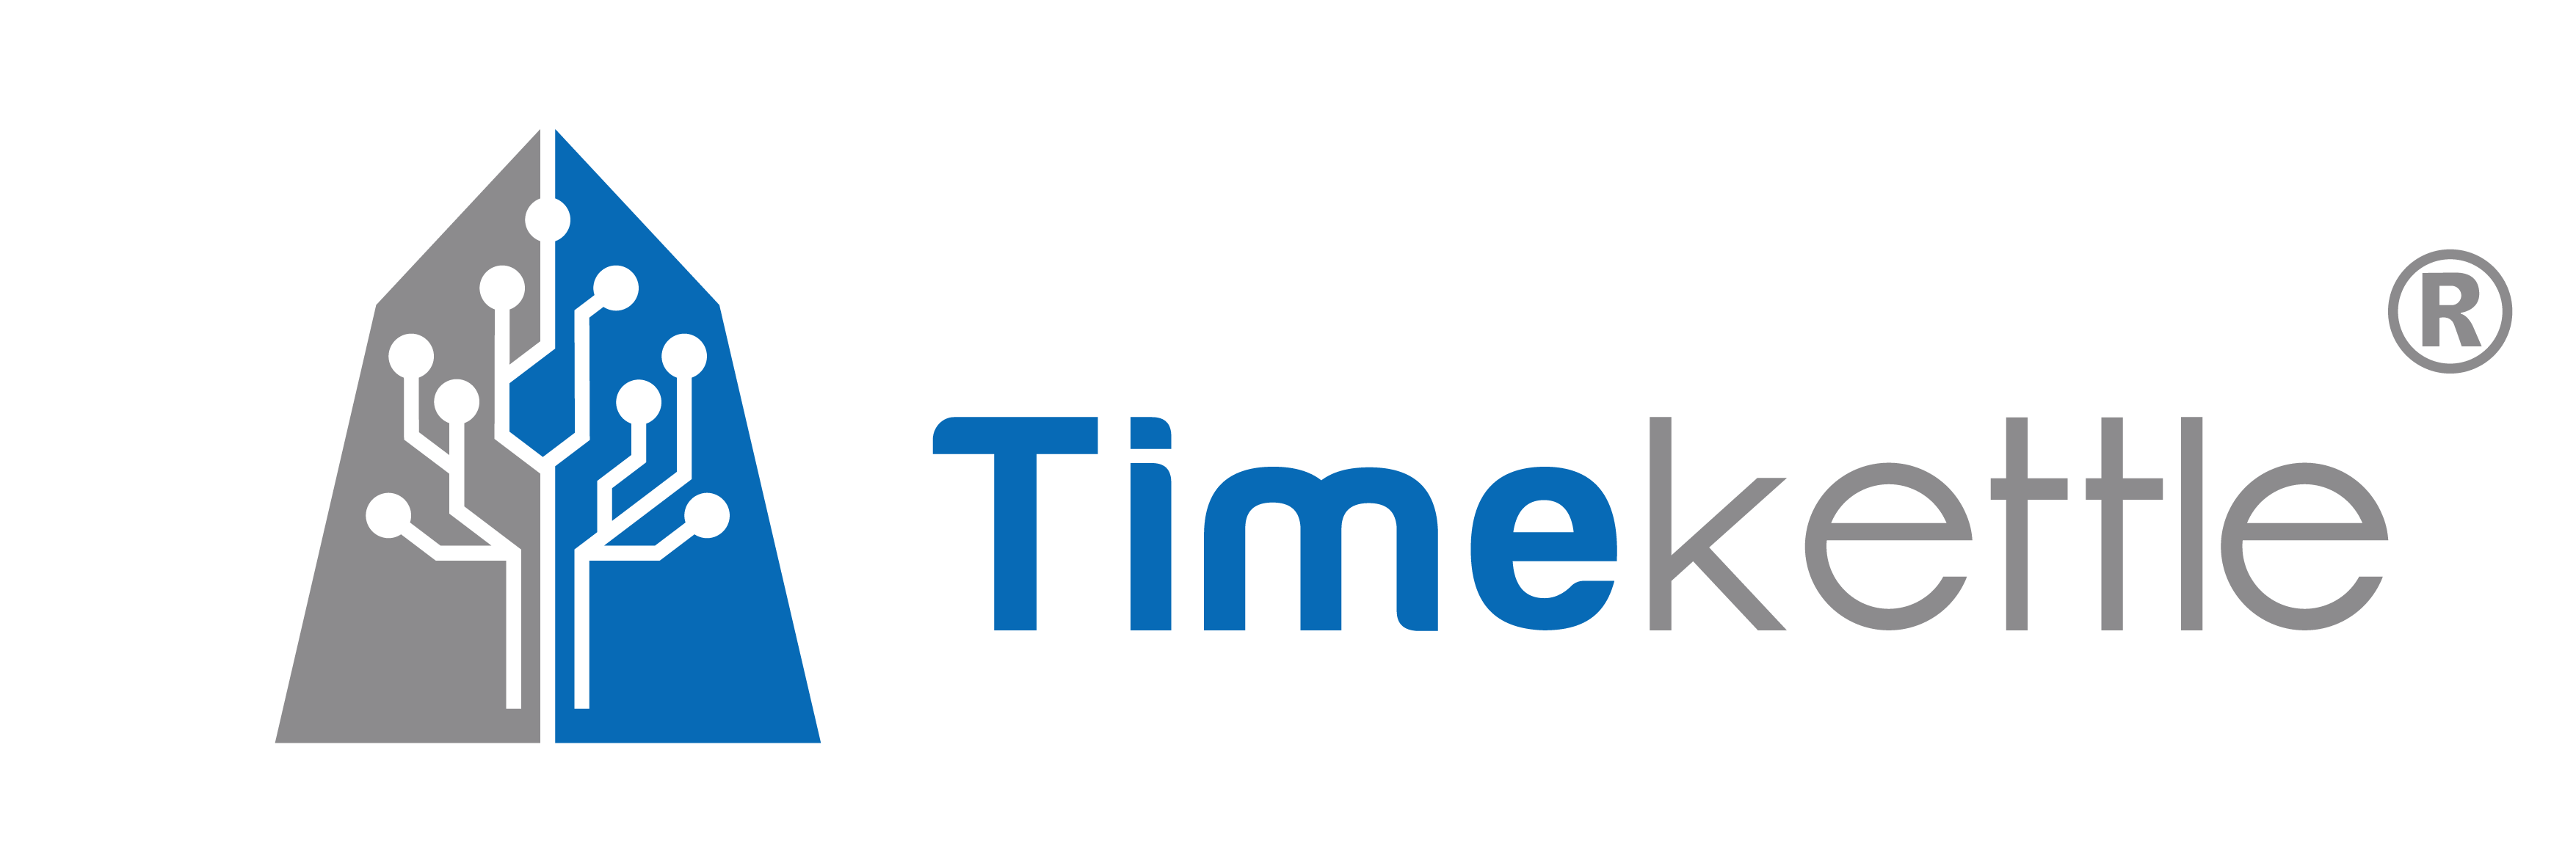 10% Off With Timekettle Promo Code